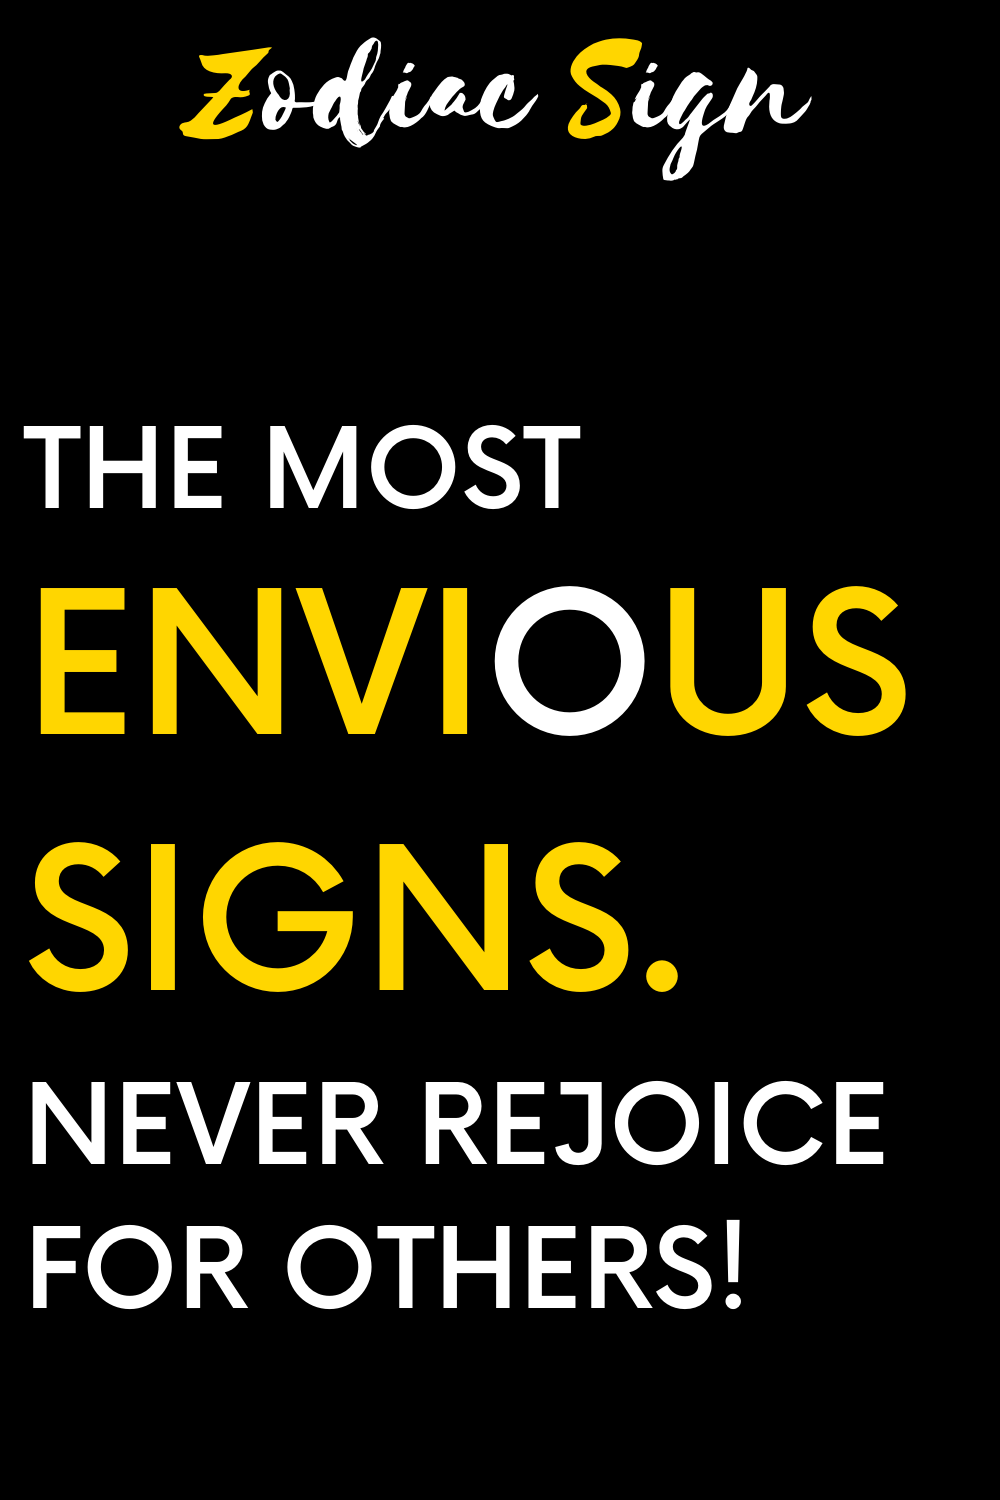 The most envious signs. Never rejoice for others!